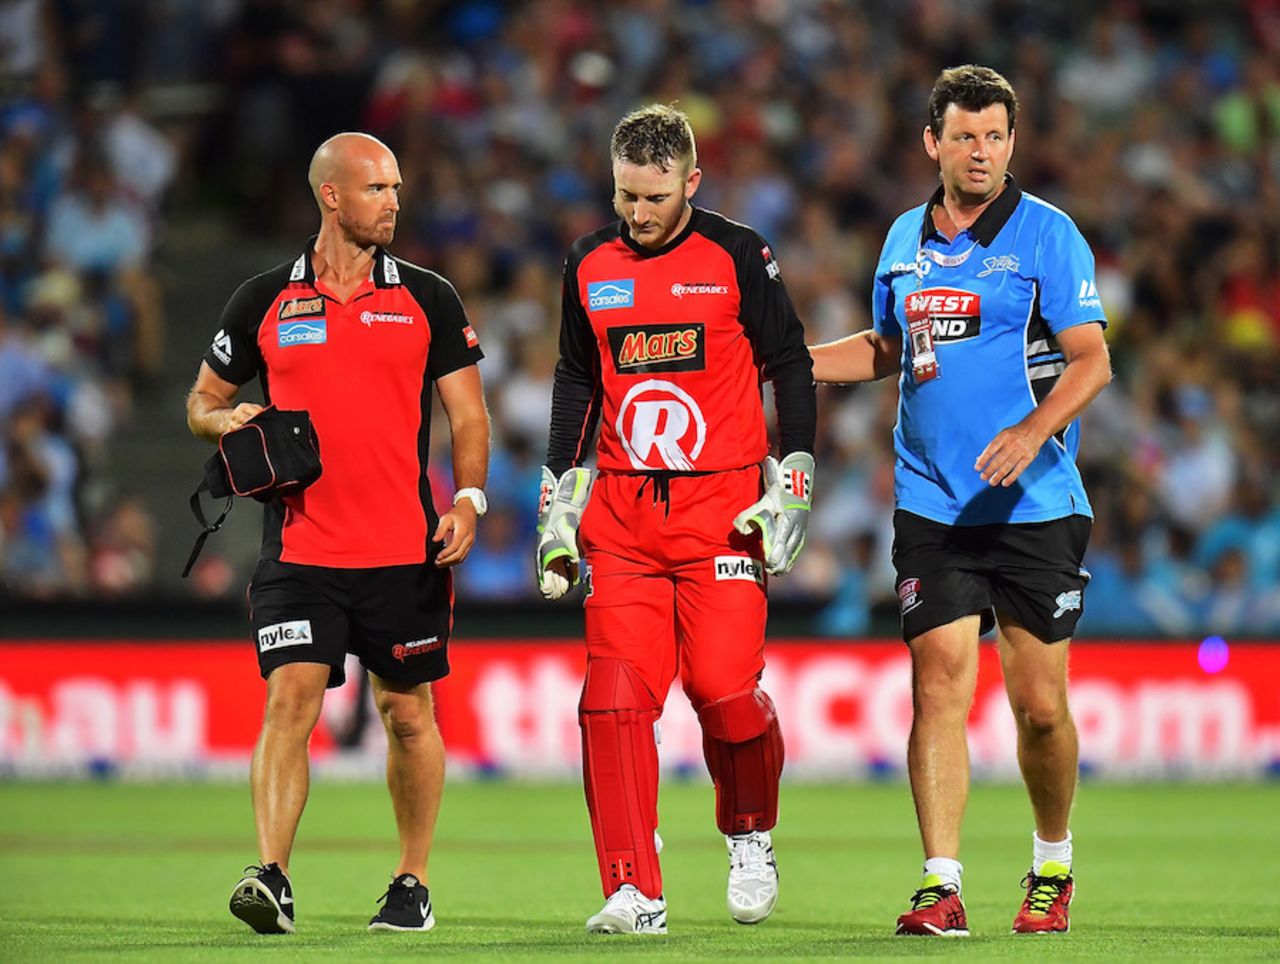 Peter Nevill is accompanied off the field after being struck in the face by Brad Hodge's bat, Adelaide Strikers v Melbourne Renegades, BBL 2016-17, Adelaide, January 16, 2017